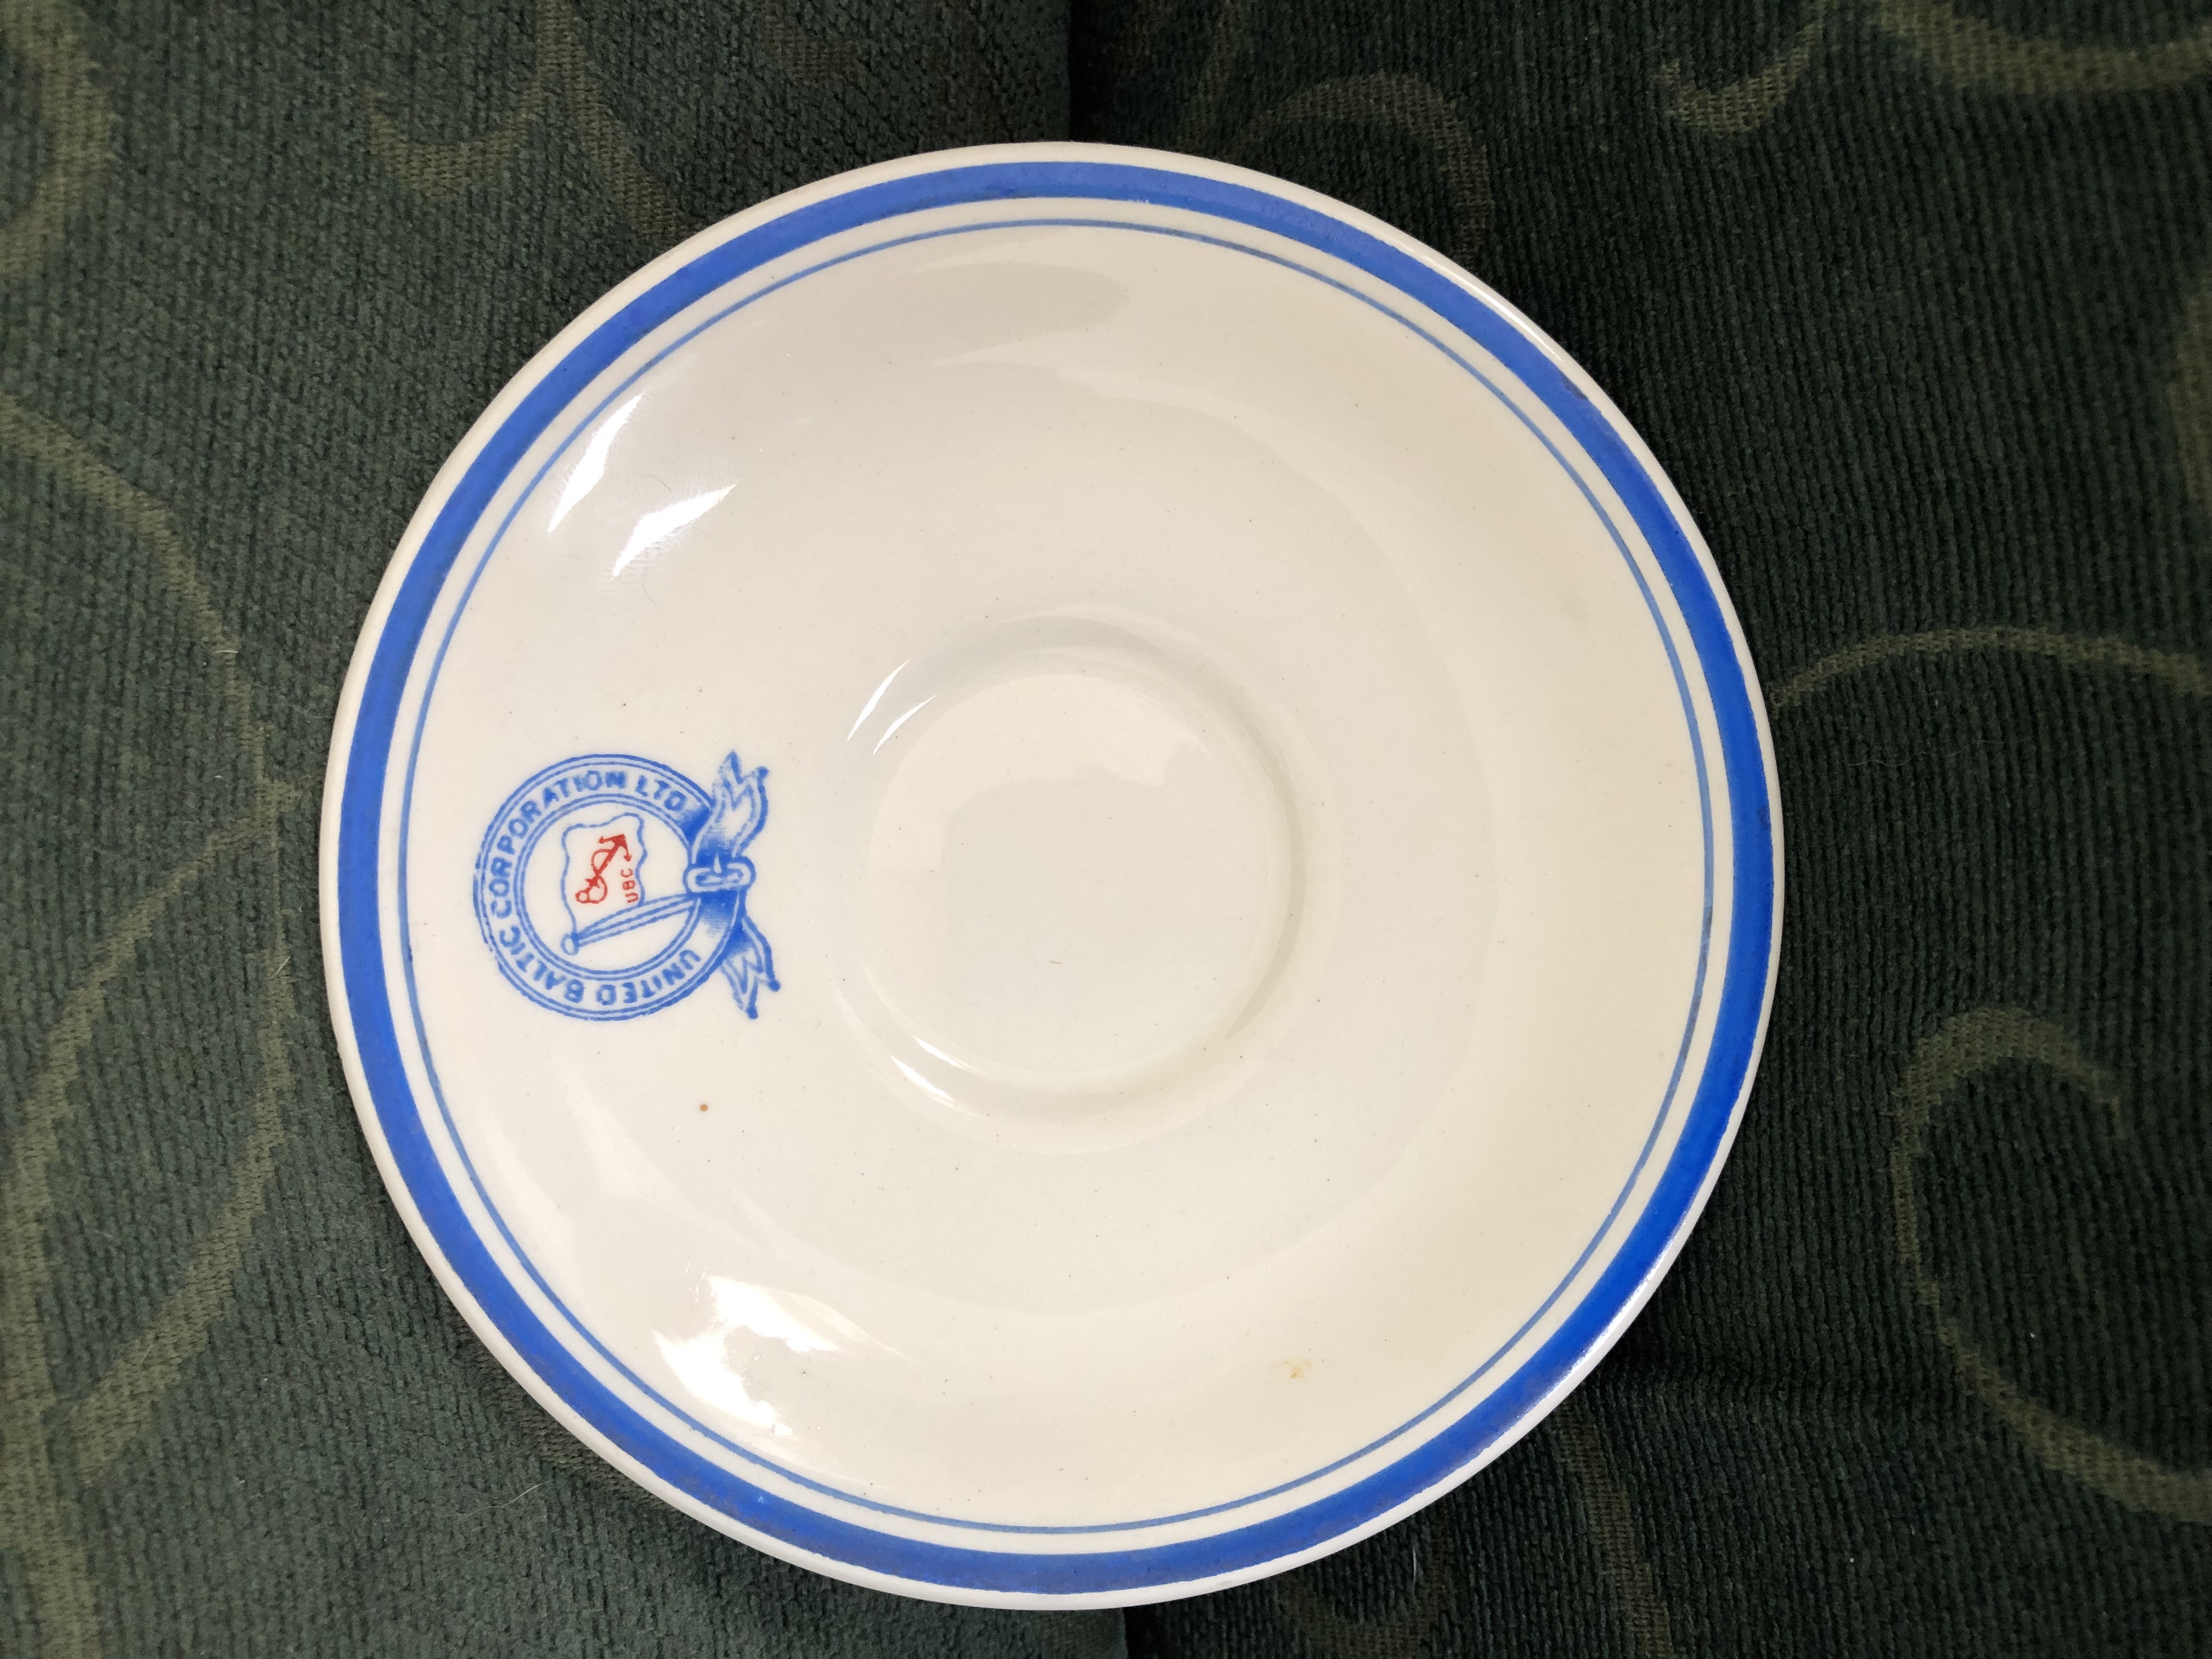 AS USED IN SERVICE SAUCER FROM THE UNITED BALTIC CORPORATION